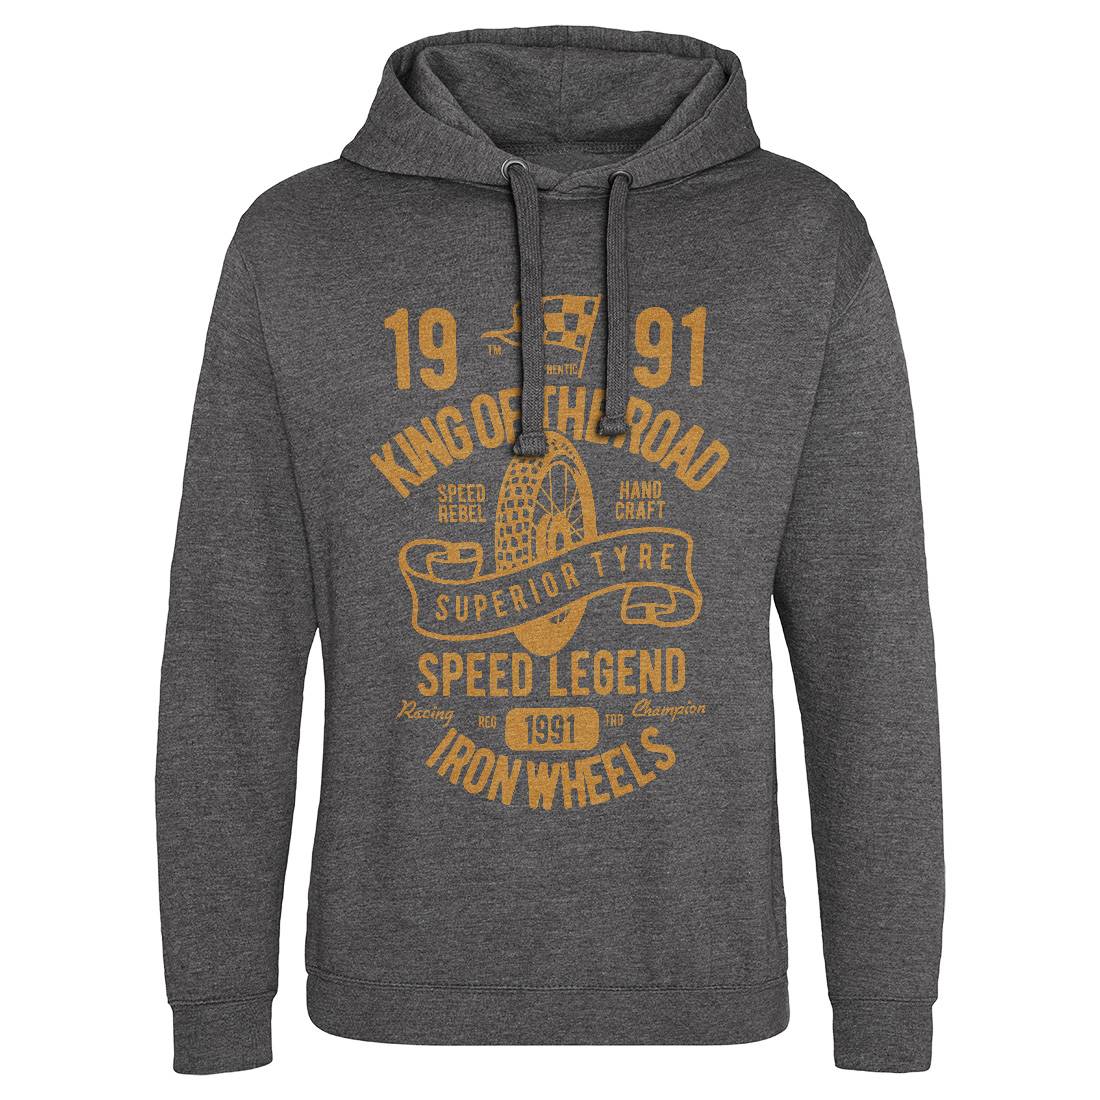 Superior Tyre King Of The Road Mens Hoodie Without Pocket Motorcycles B458